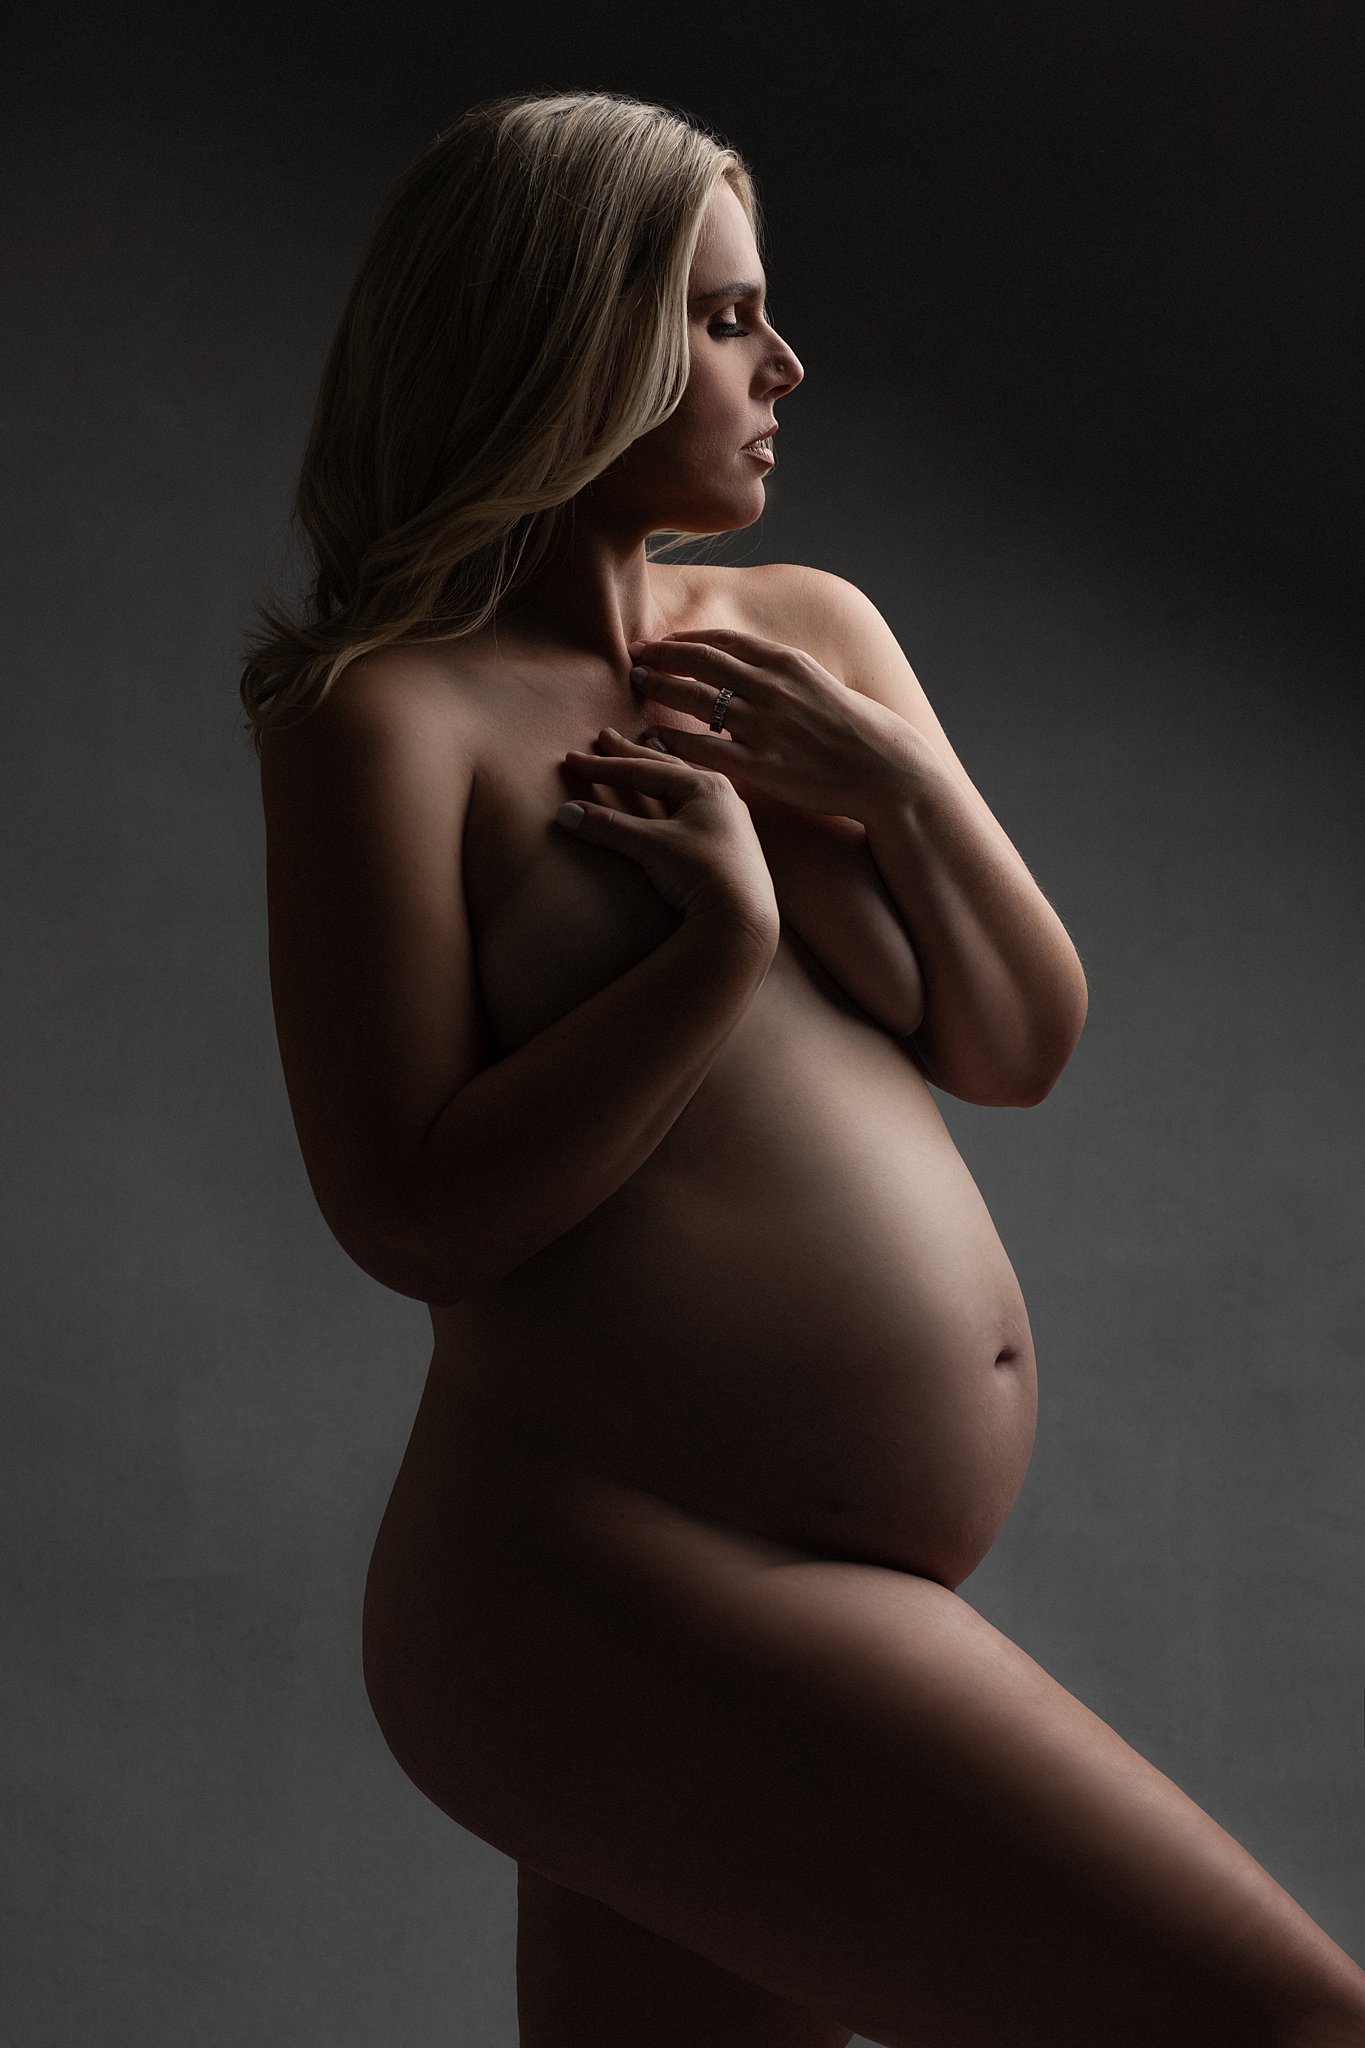 A pregnant woman stands in a studio with long blonde hair